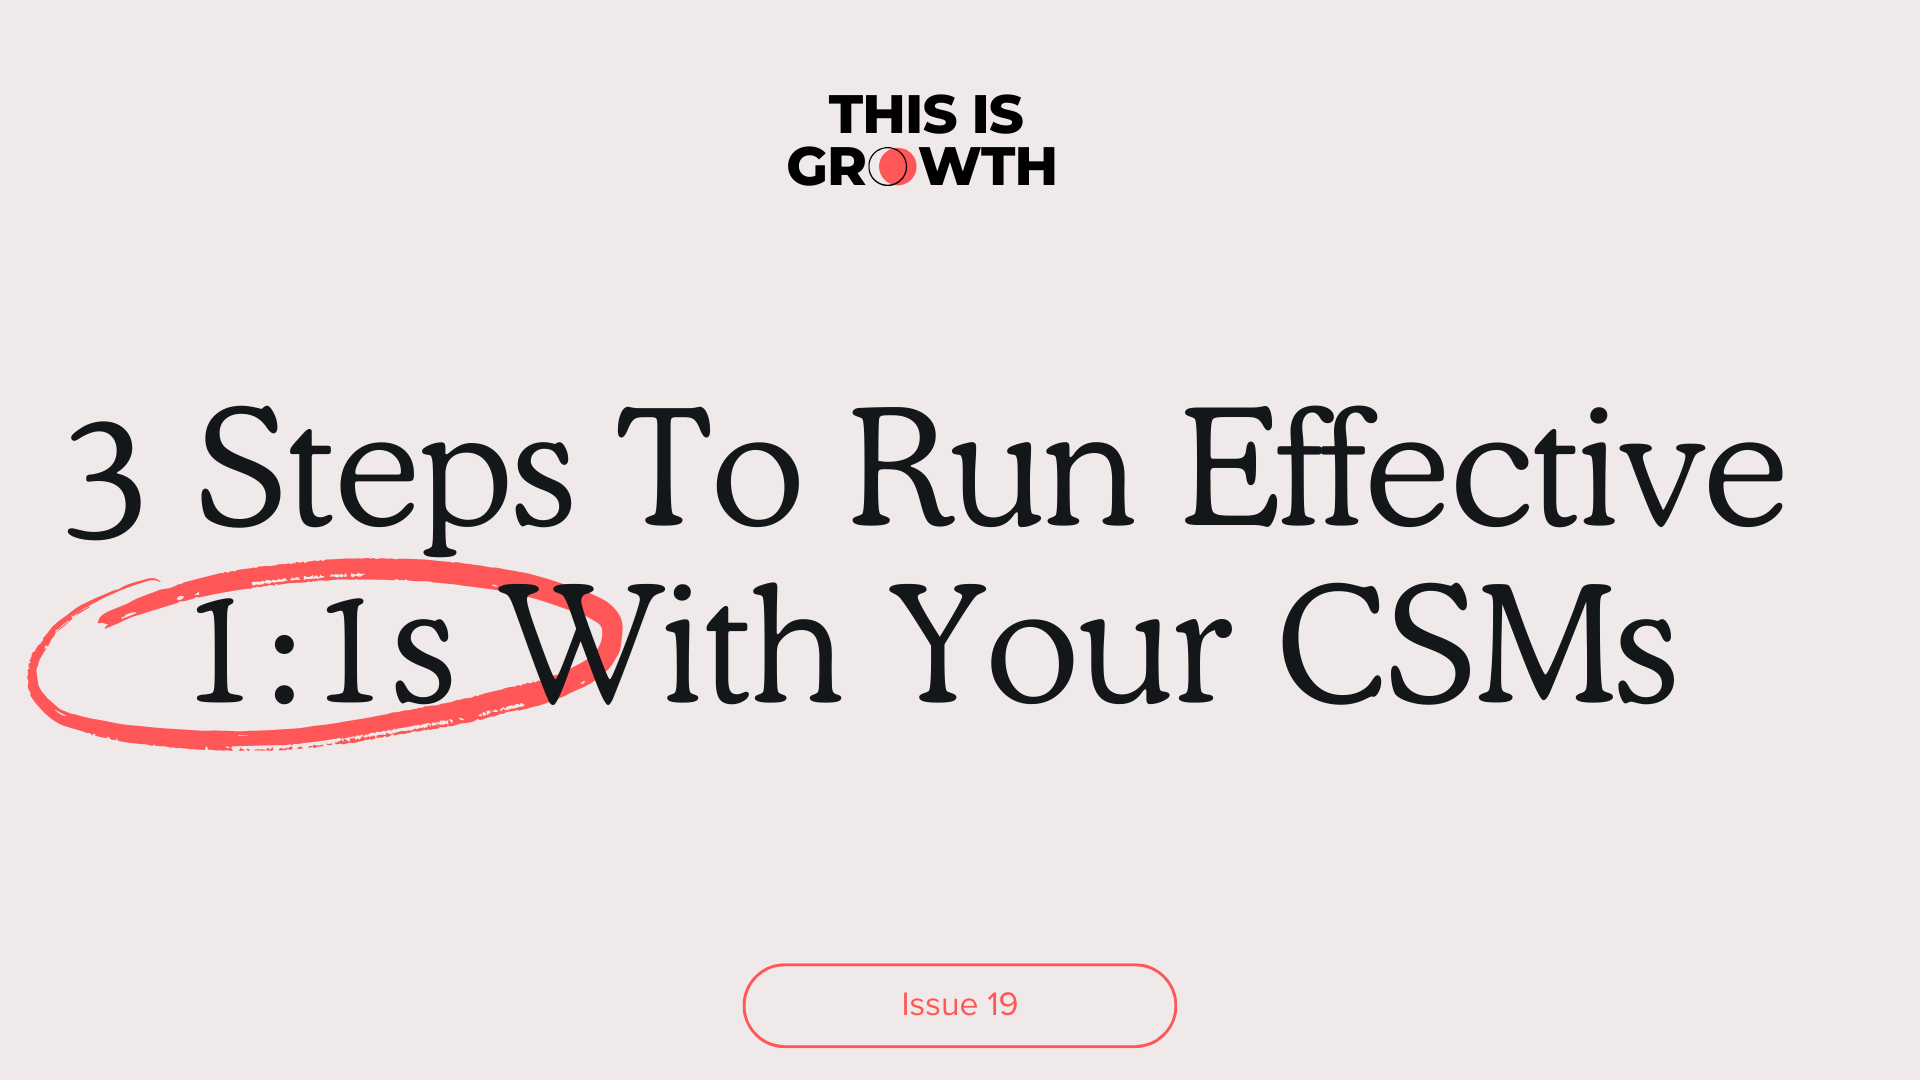 run effective 1:1s with your CSMs